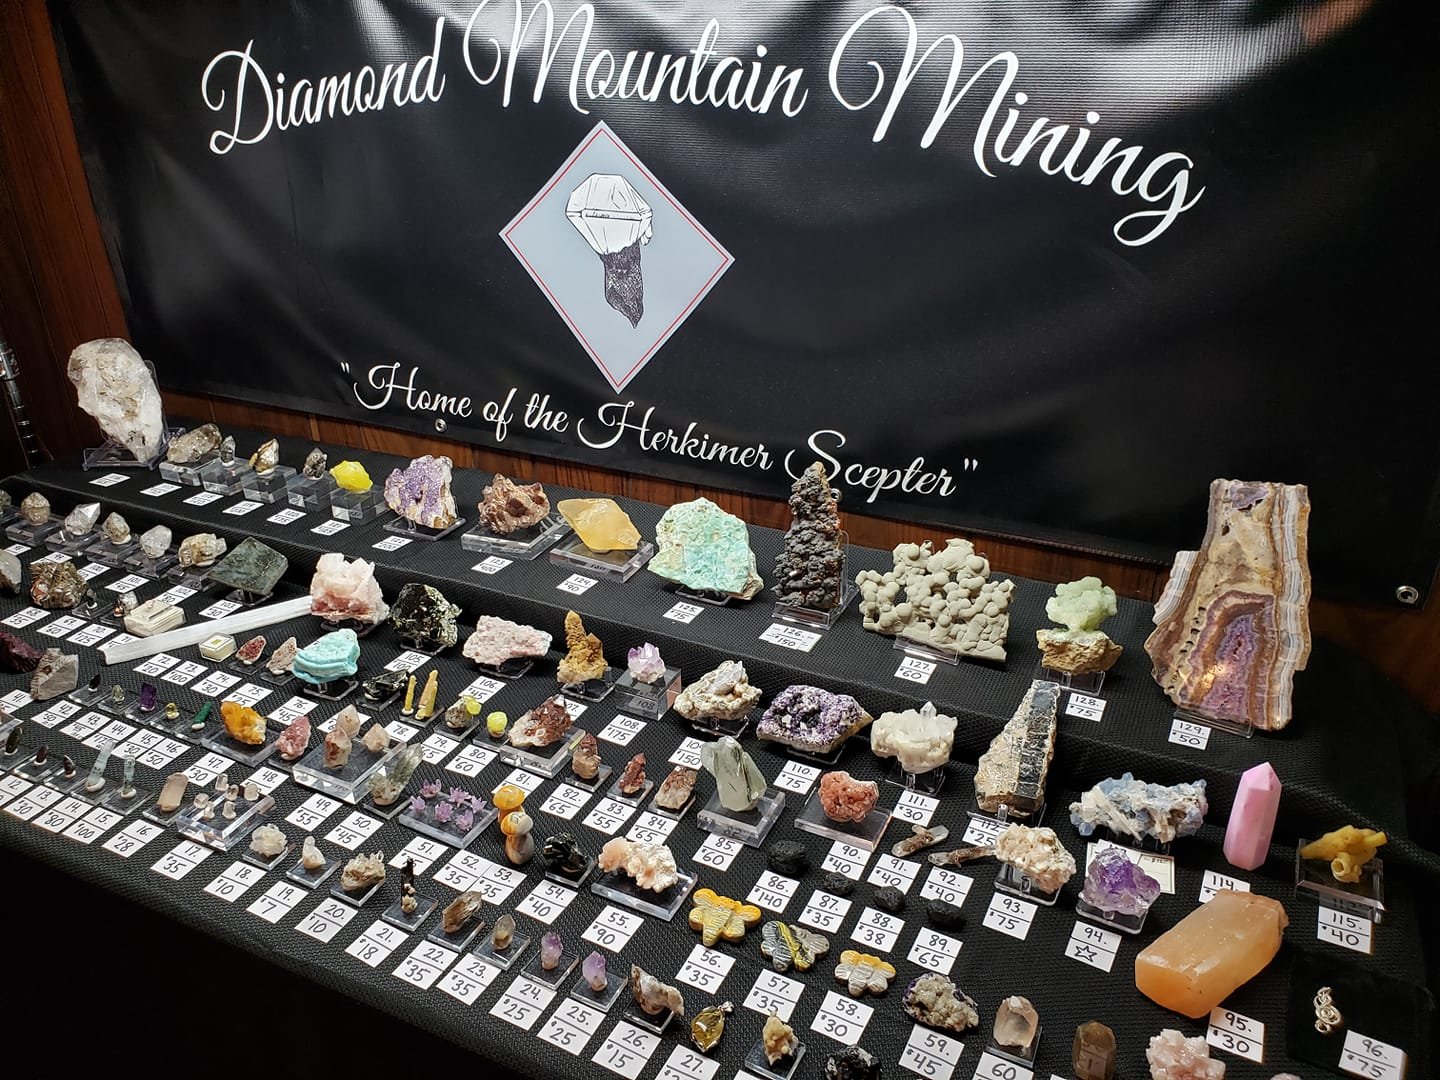 The table is set for one of Diamond Mountain Mining’s Facebook Live sales.